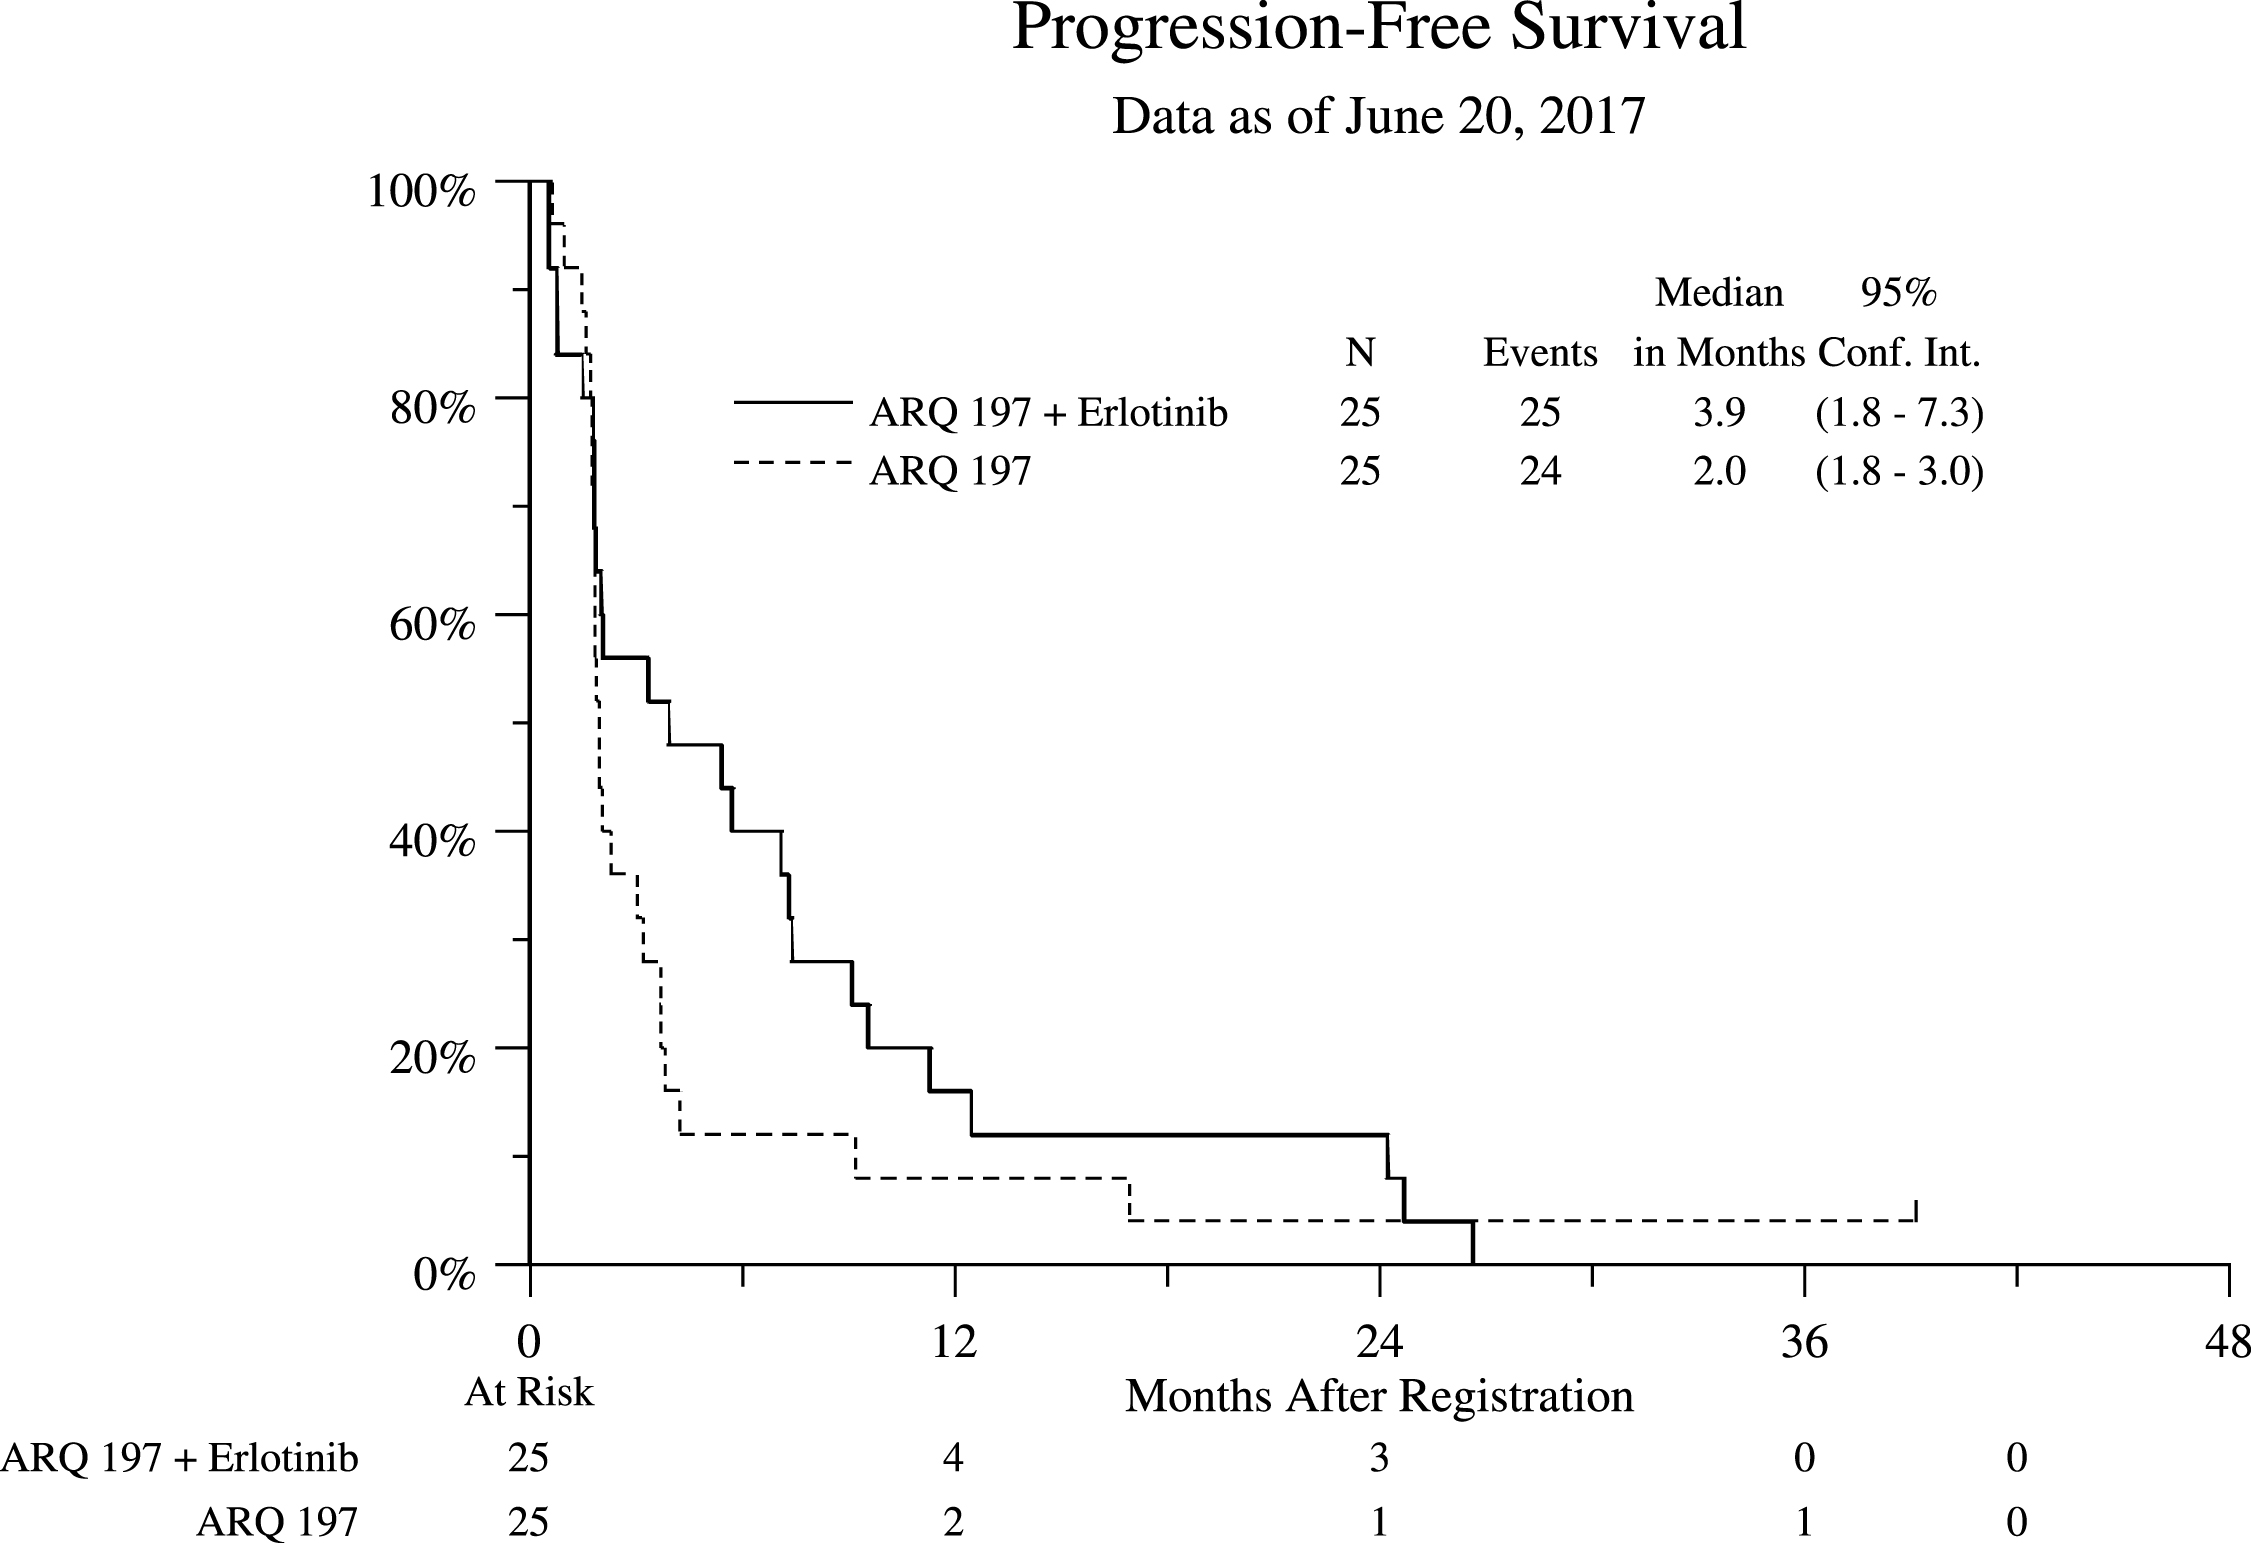 Progression Free Survival (PFS) Stratified by Treatment Arm for All Eligible Patients.